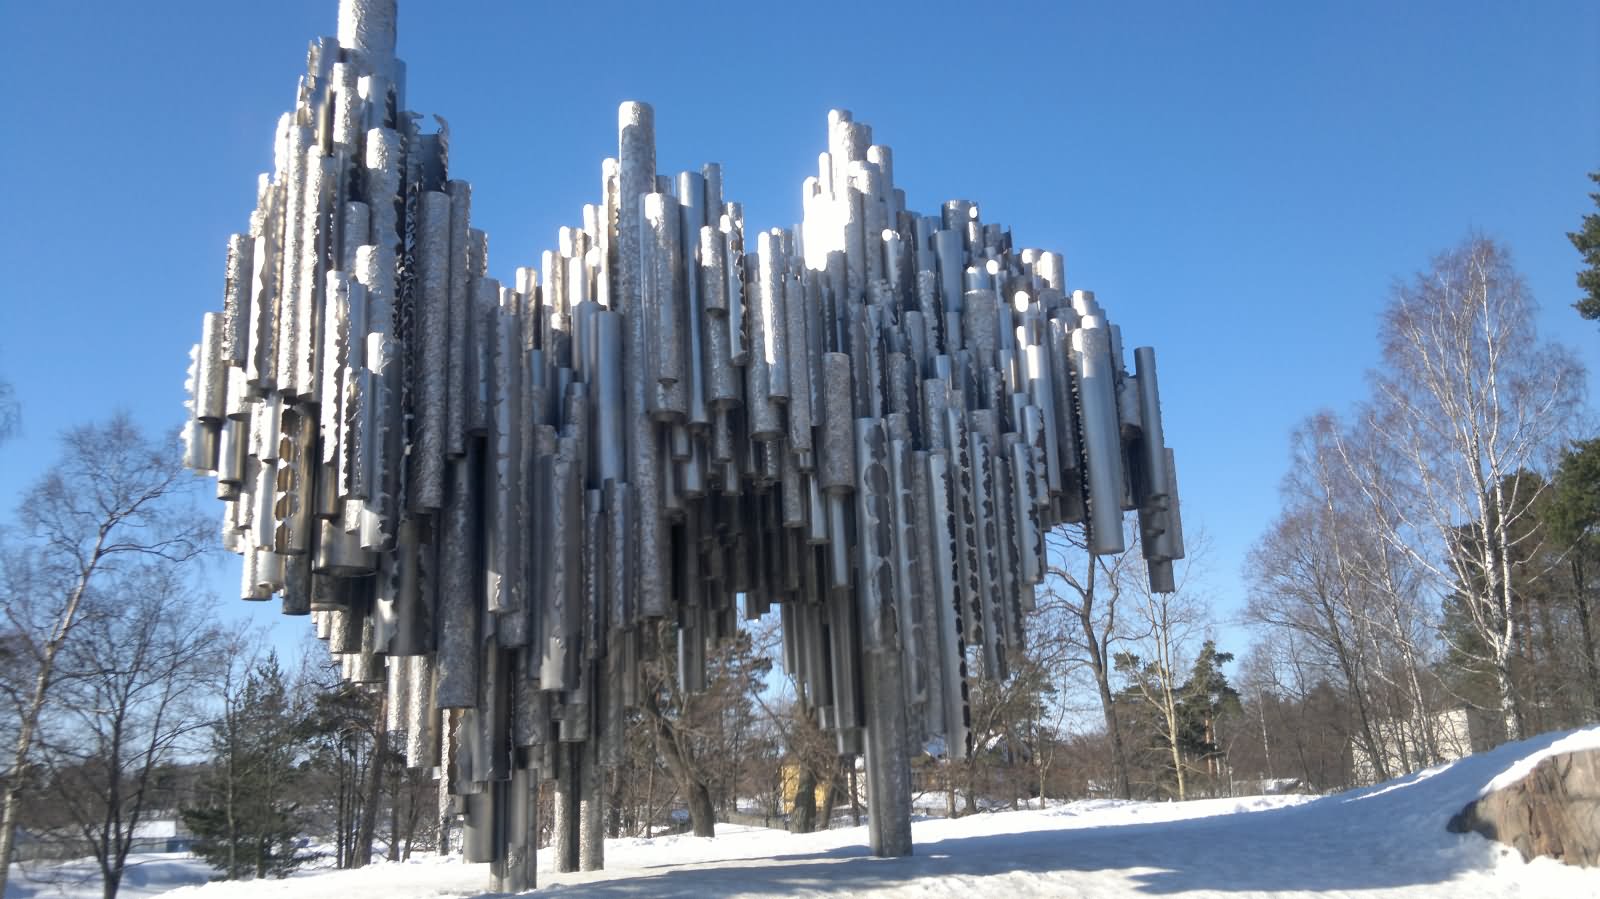 The Sibelius Monument With Snow In Helsinki, Finland